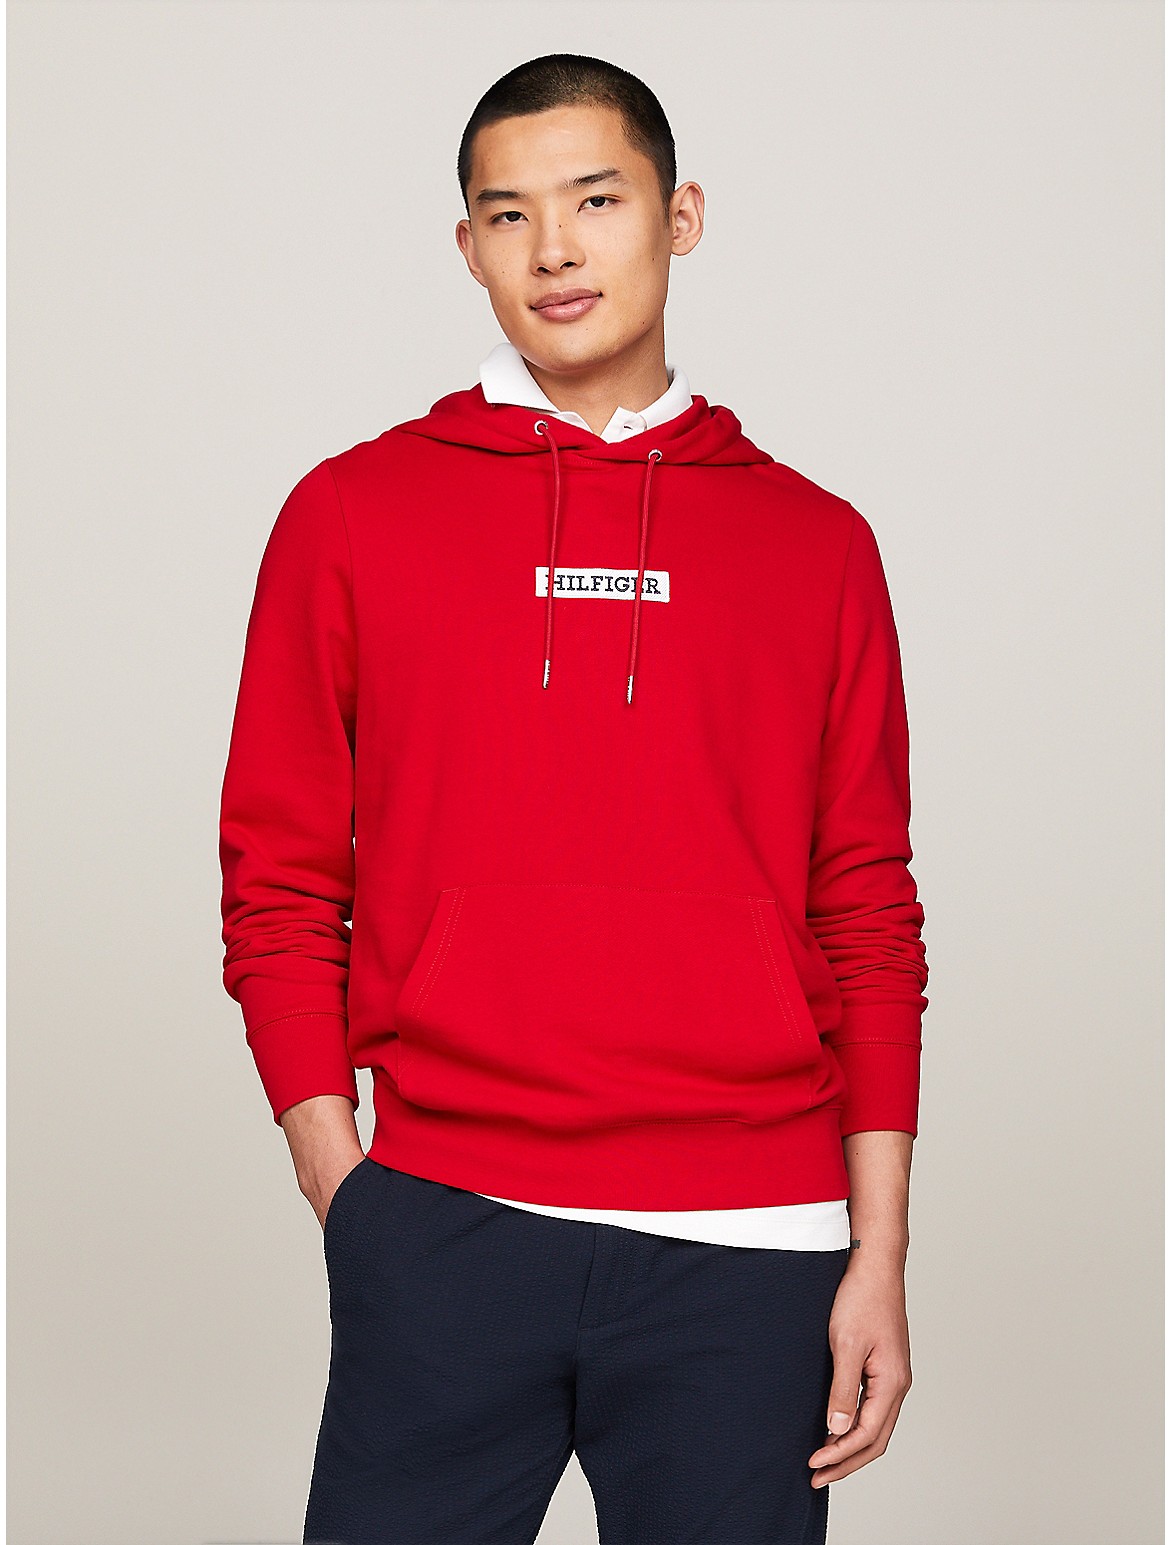 Tommy Hilfiger Men's Monotype Patch Hoodie